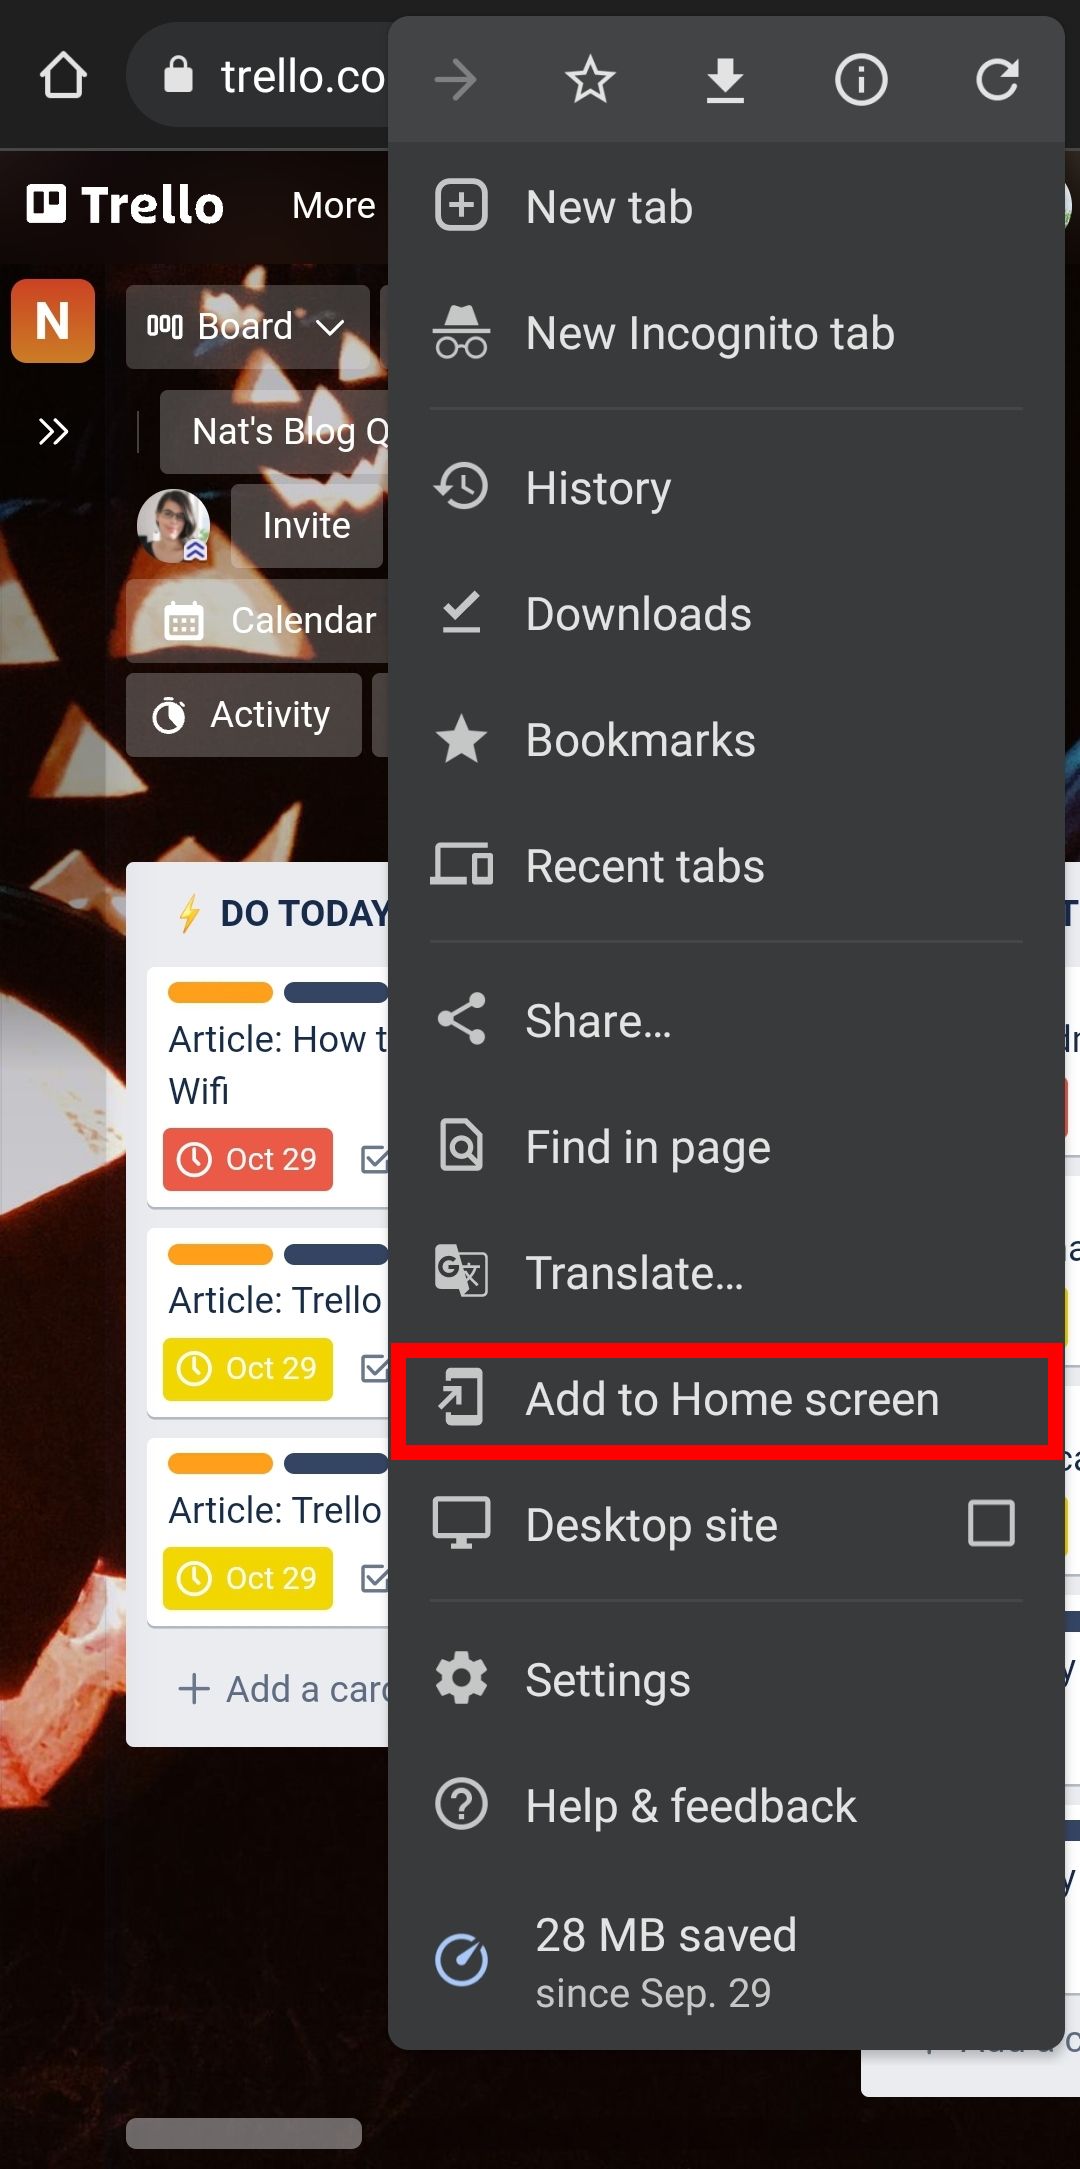 Trello viewed in Google Chrome for Android, with the Add to Home Screen option highlighted in the menu.